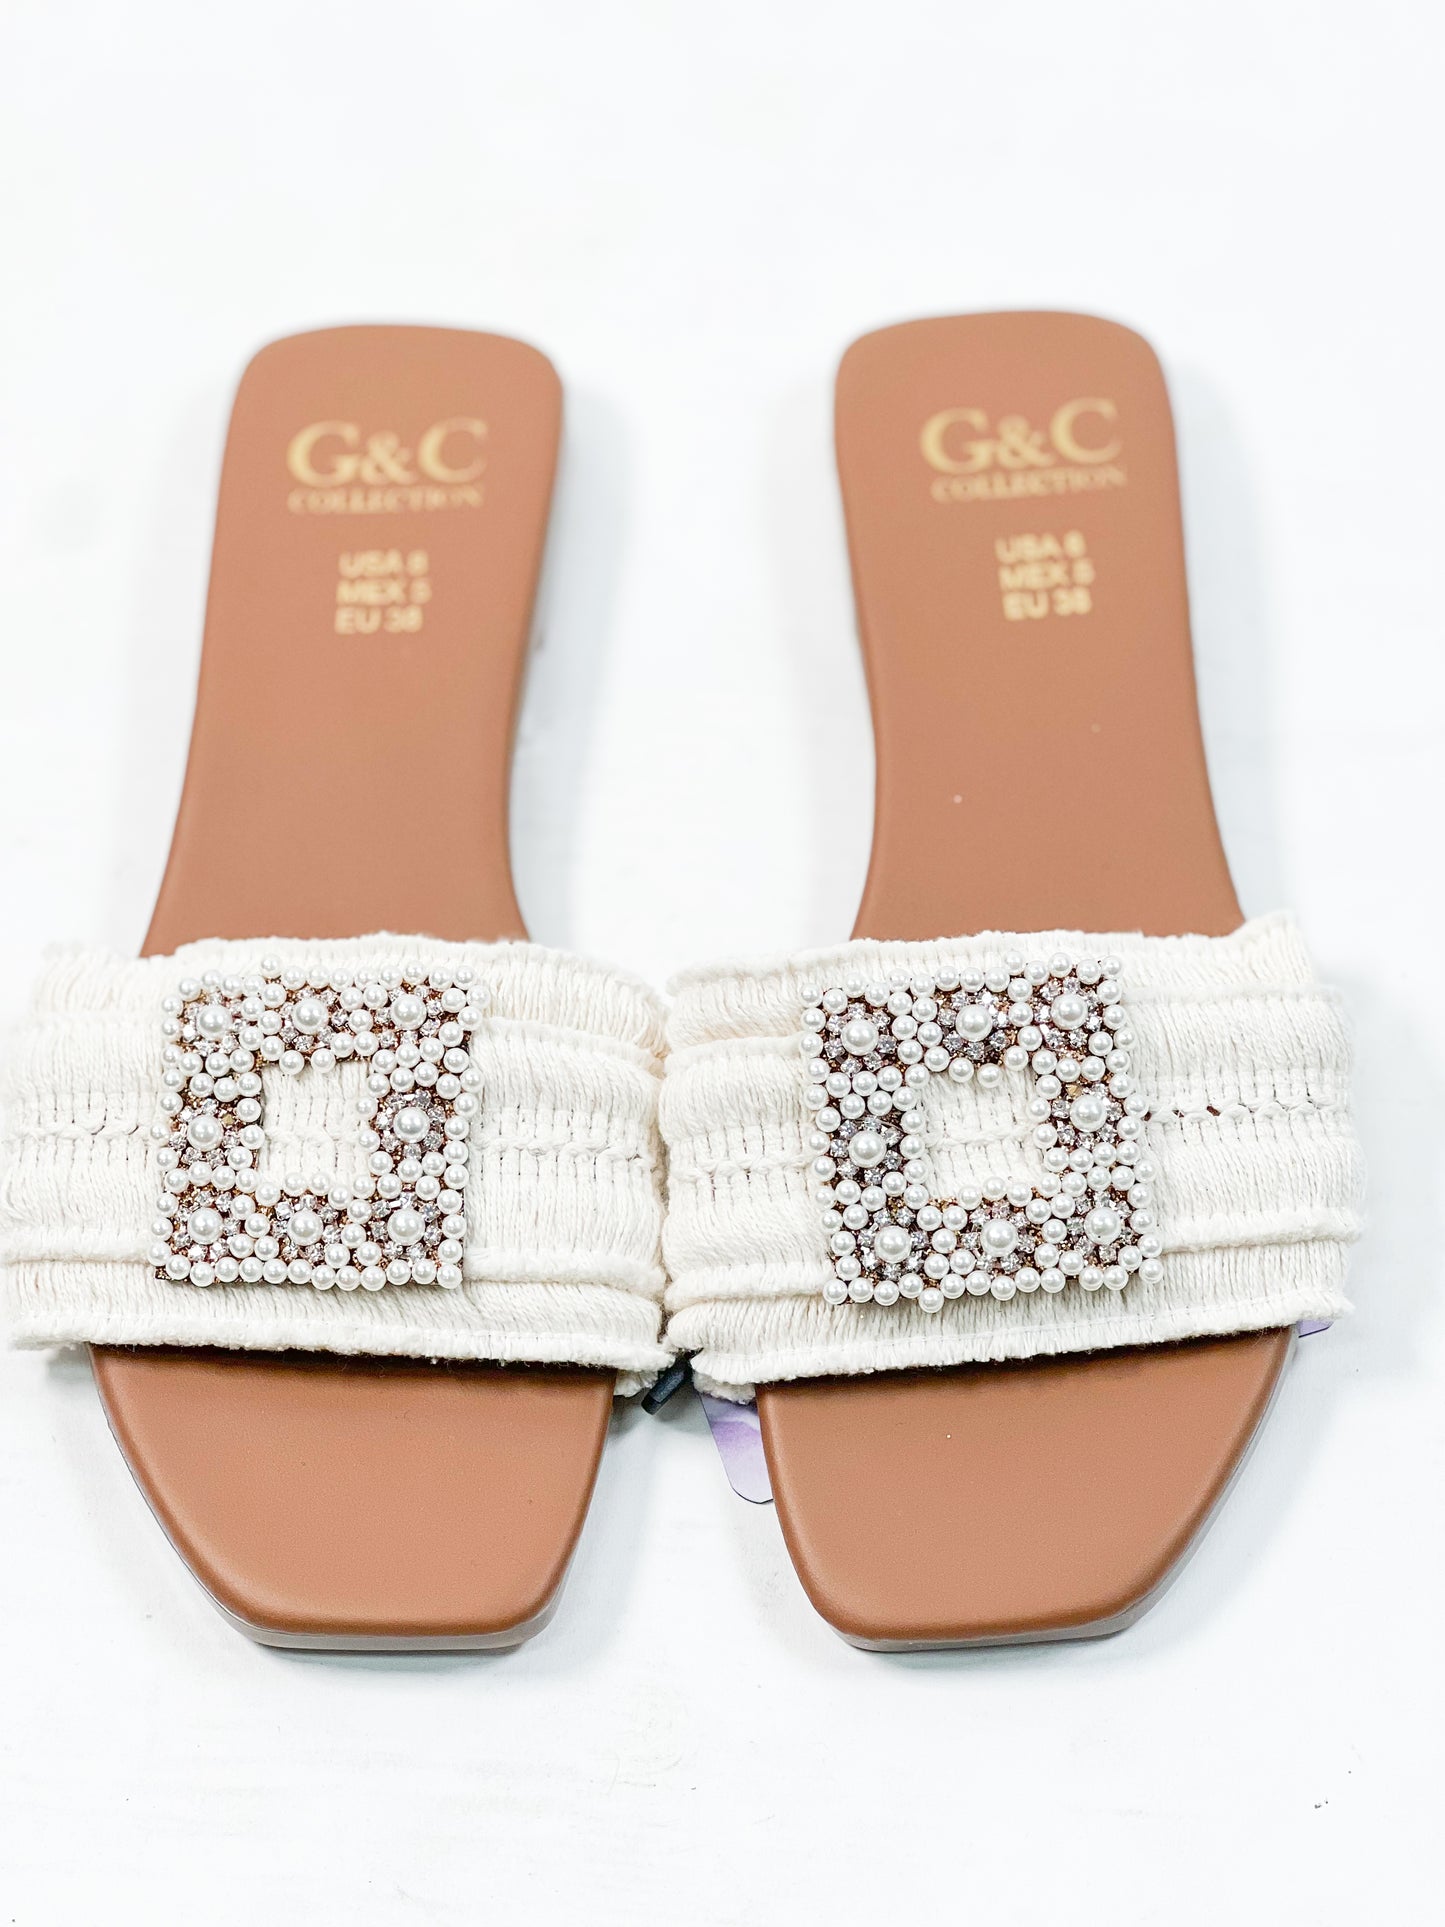 Square Pearls Beaded Flat Sandals